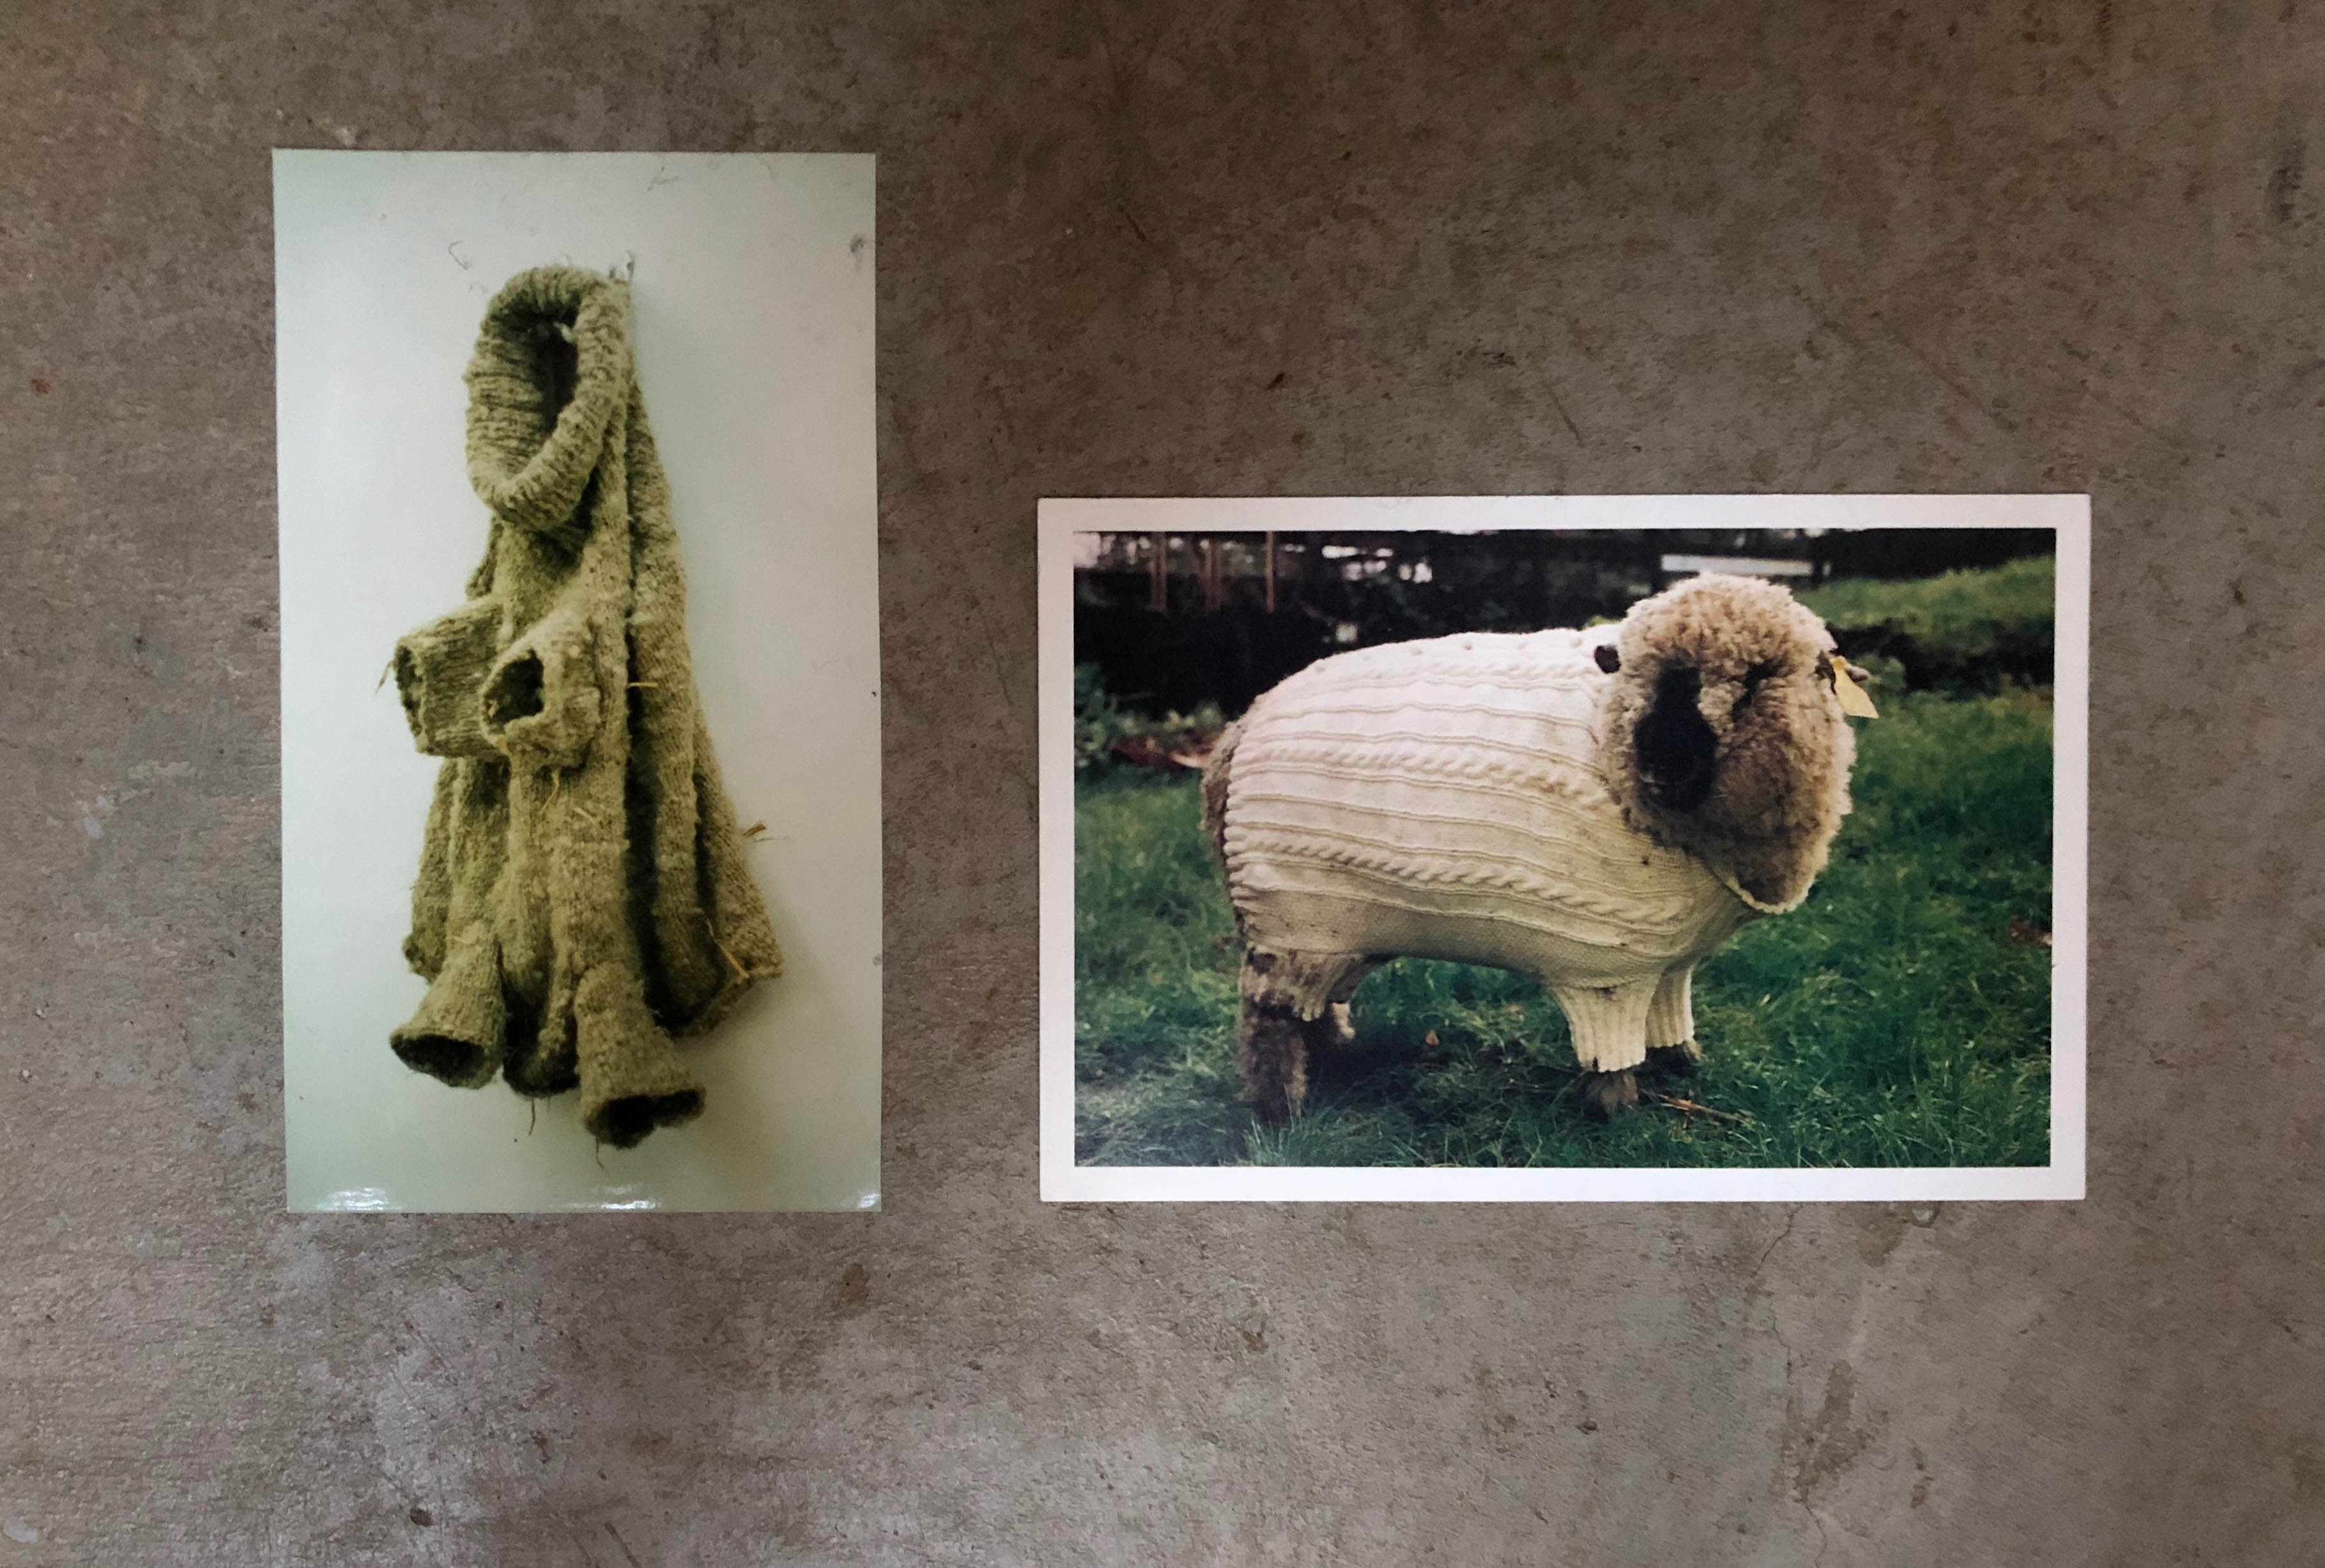 Cecilie Telle, "It Bags", knitted wool jumper for a sheep